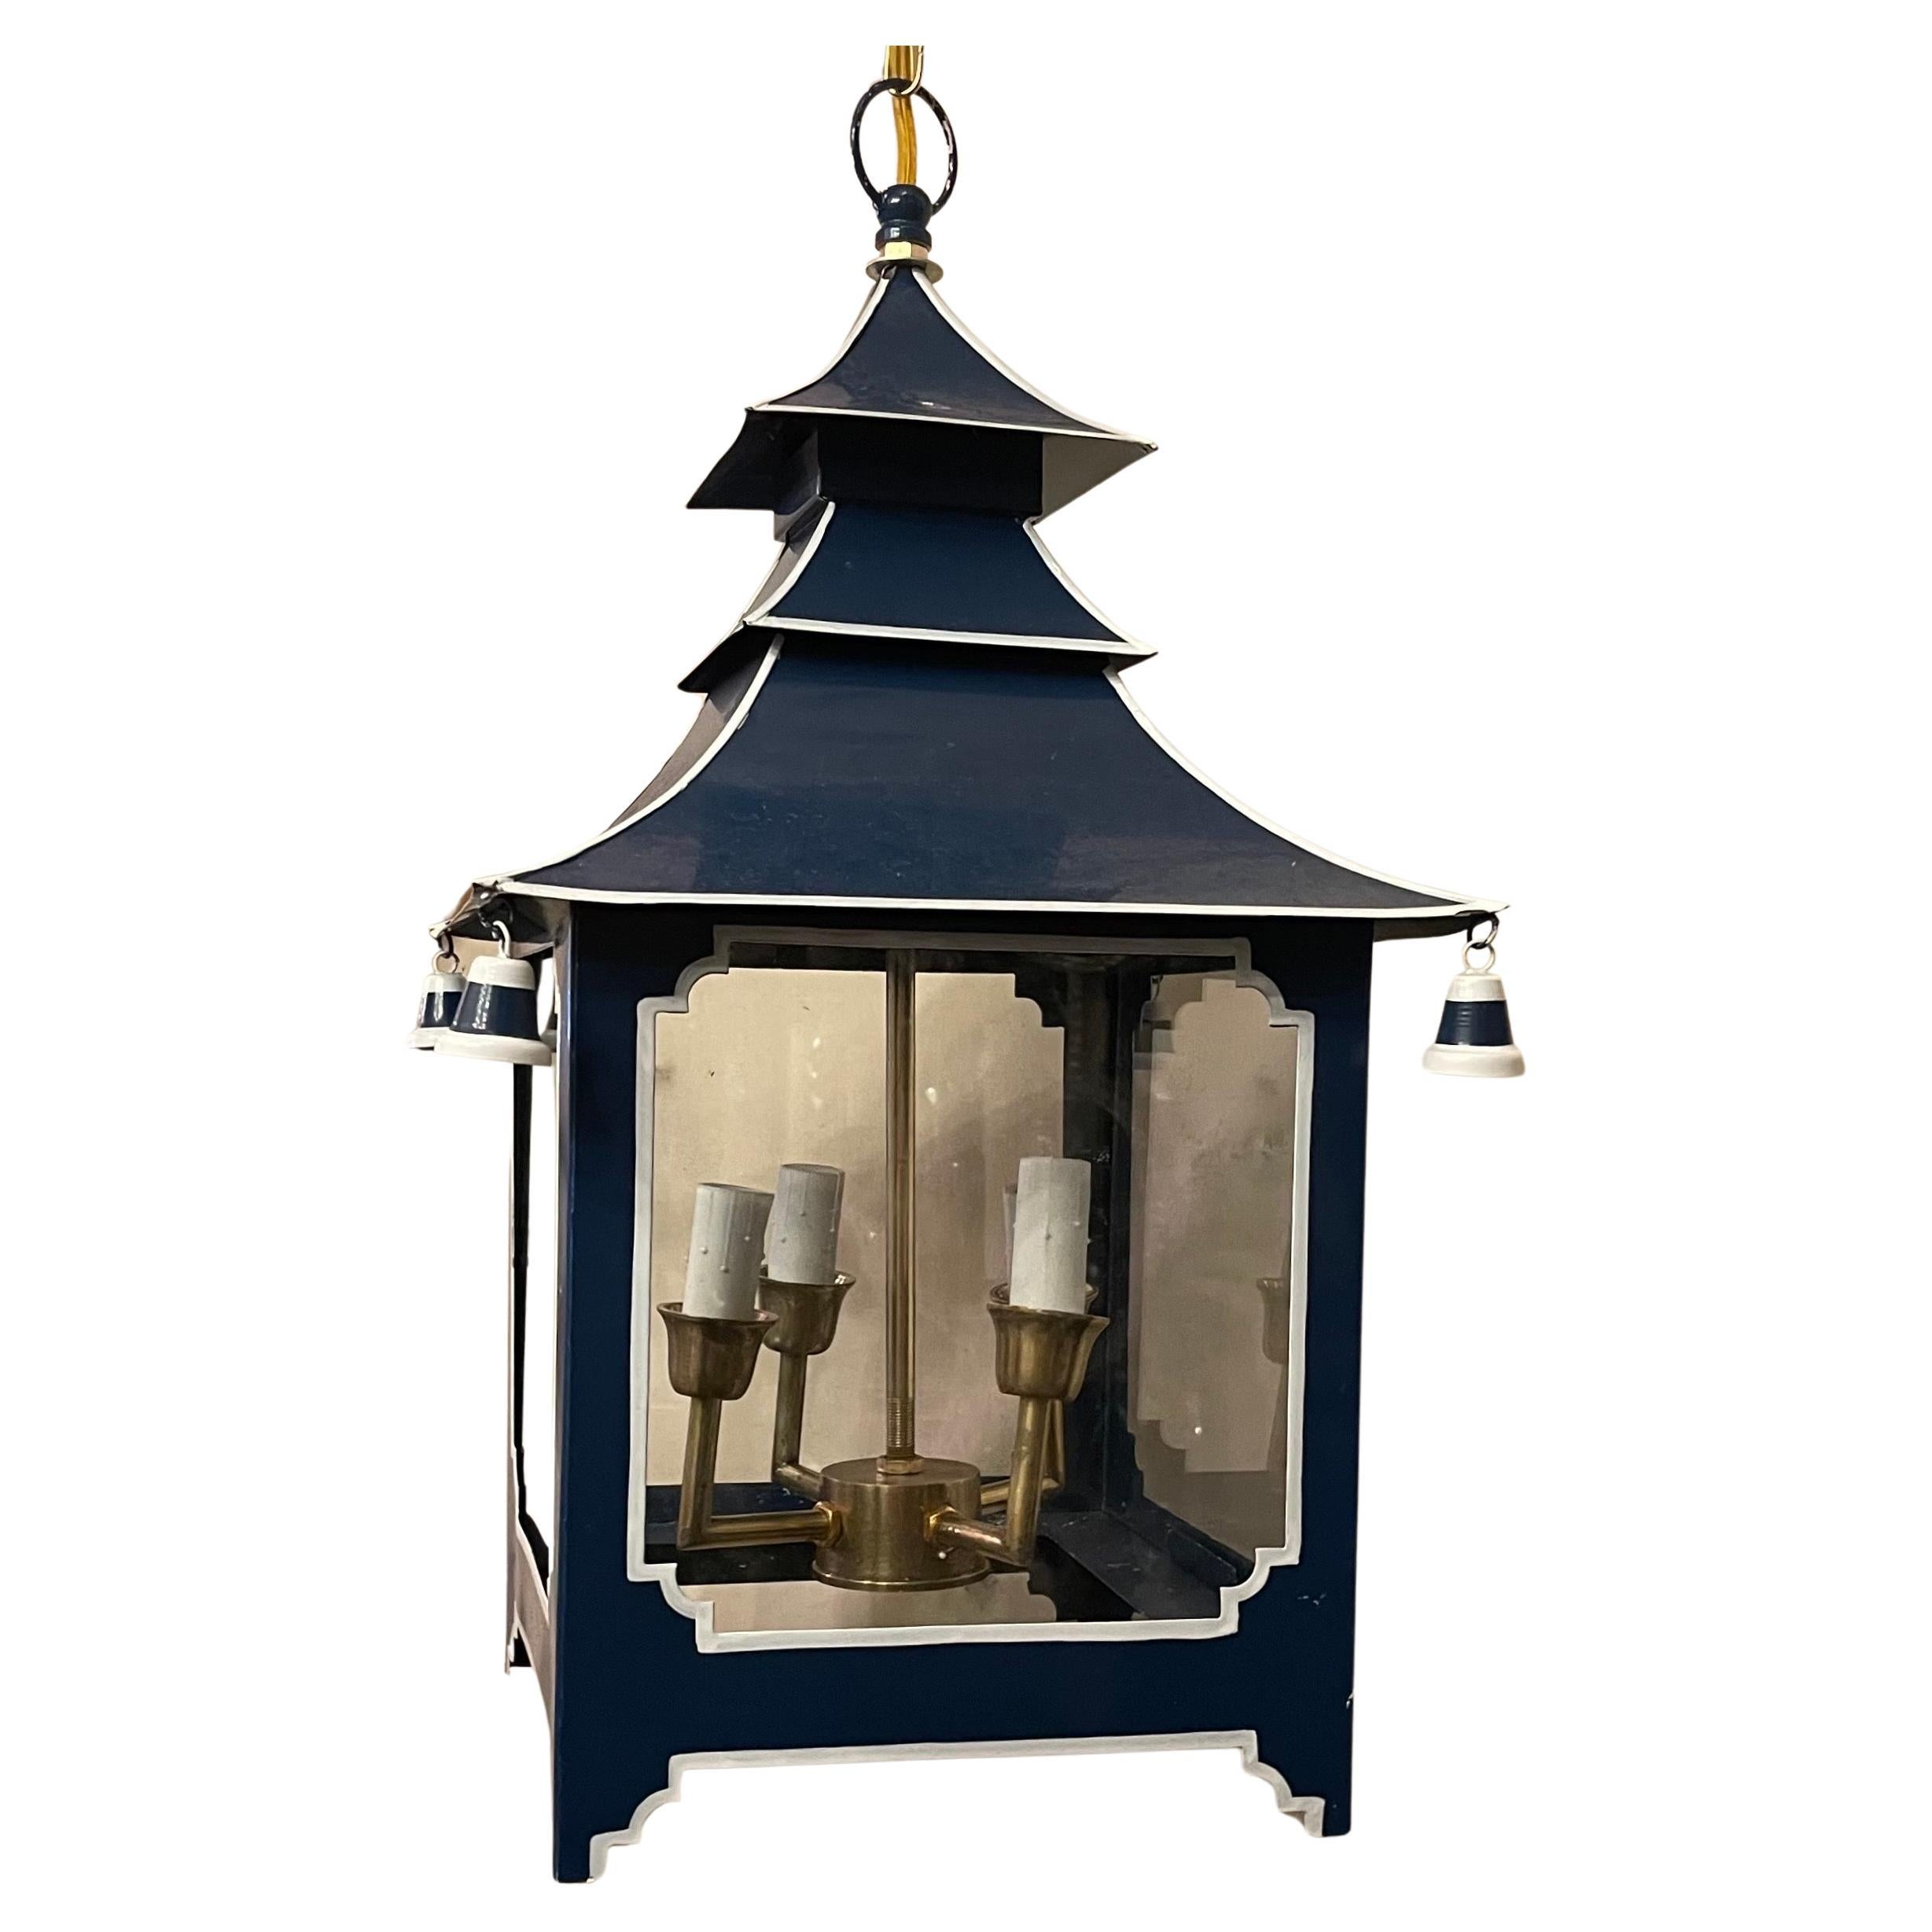 Wonderful chinoiserie pagoda square cobalt blue white contrast trim enameled paint and glass panel 4-light lantern fixture, completely rewired and ready to install with chain canopy and mounting hardware.